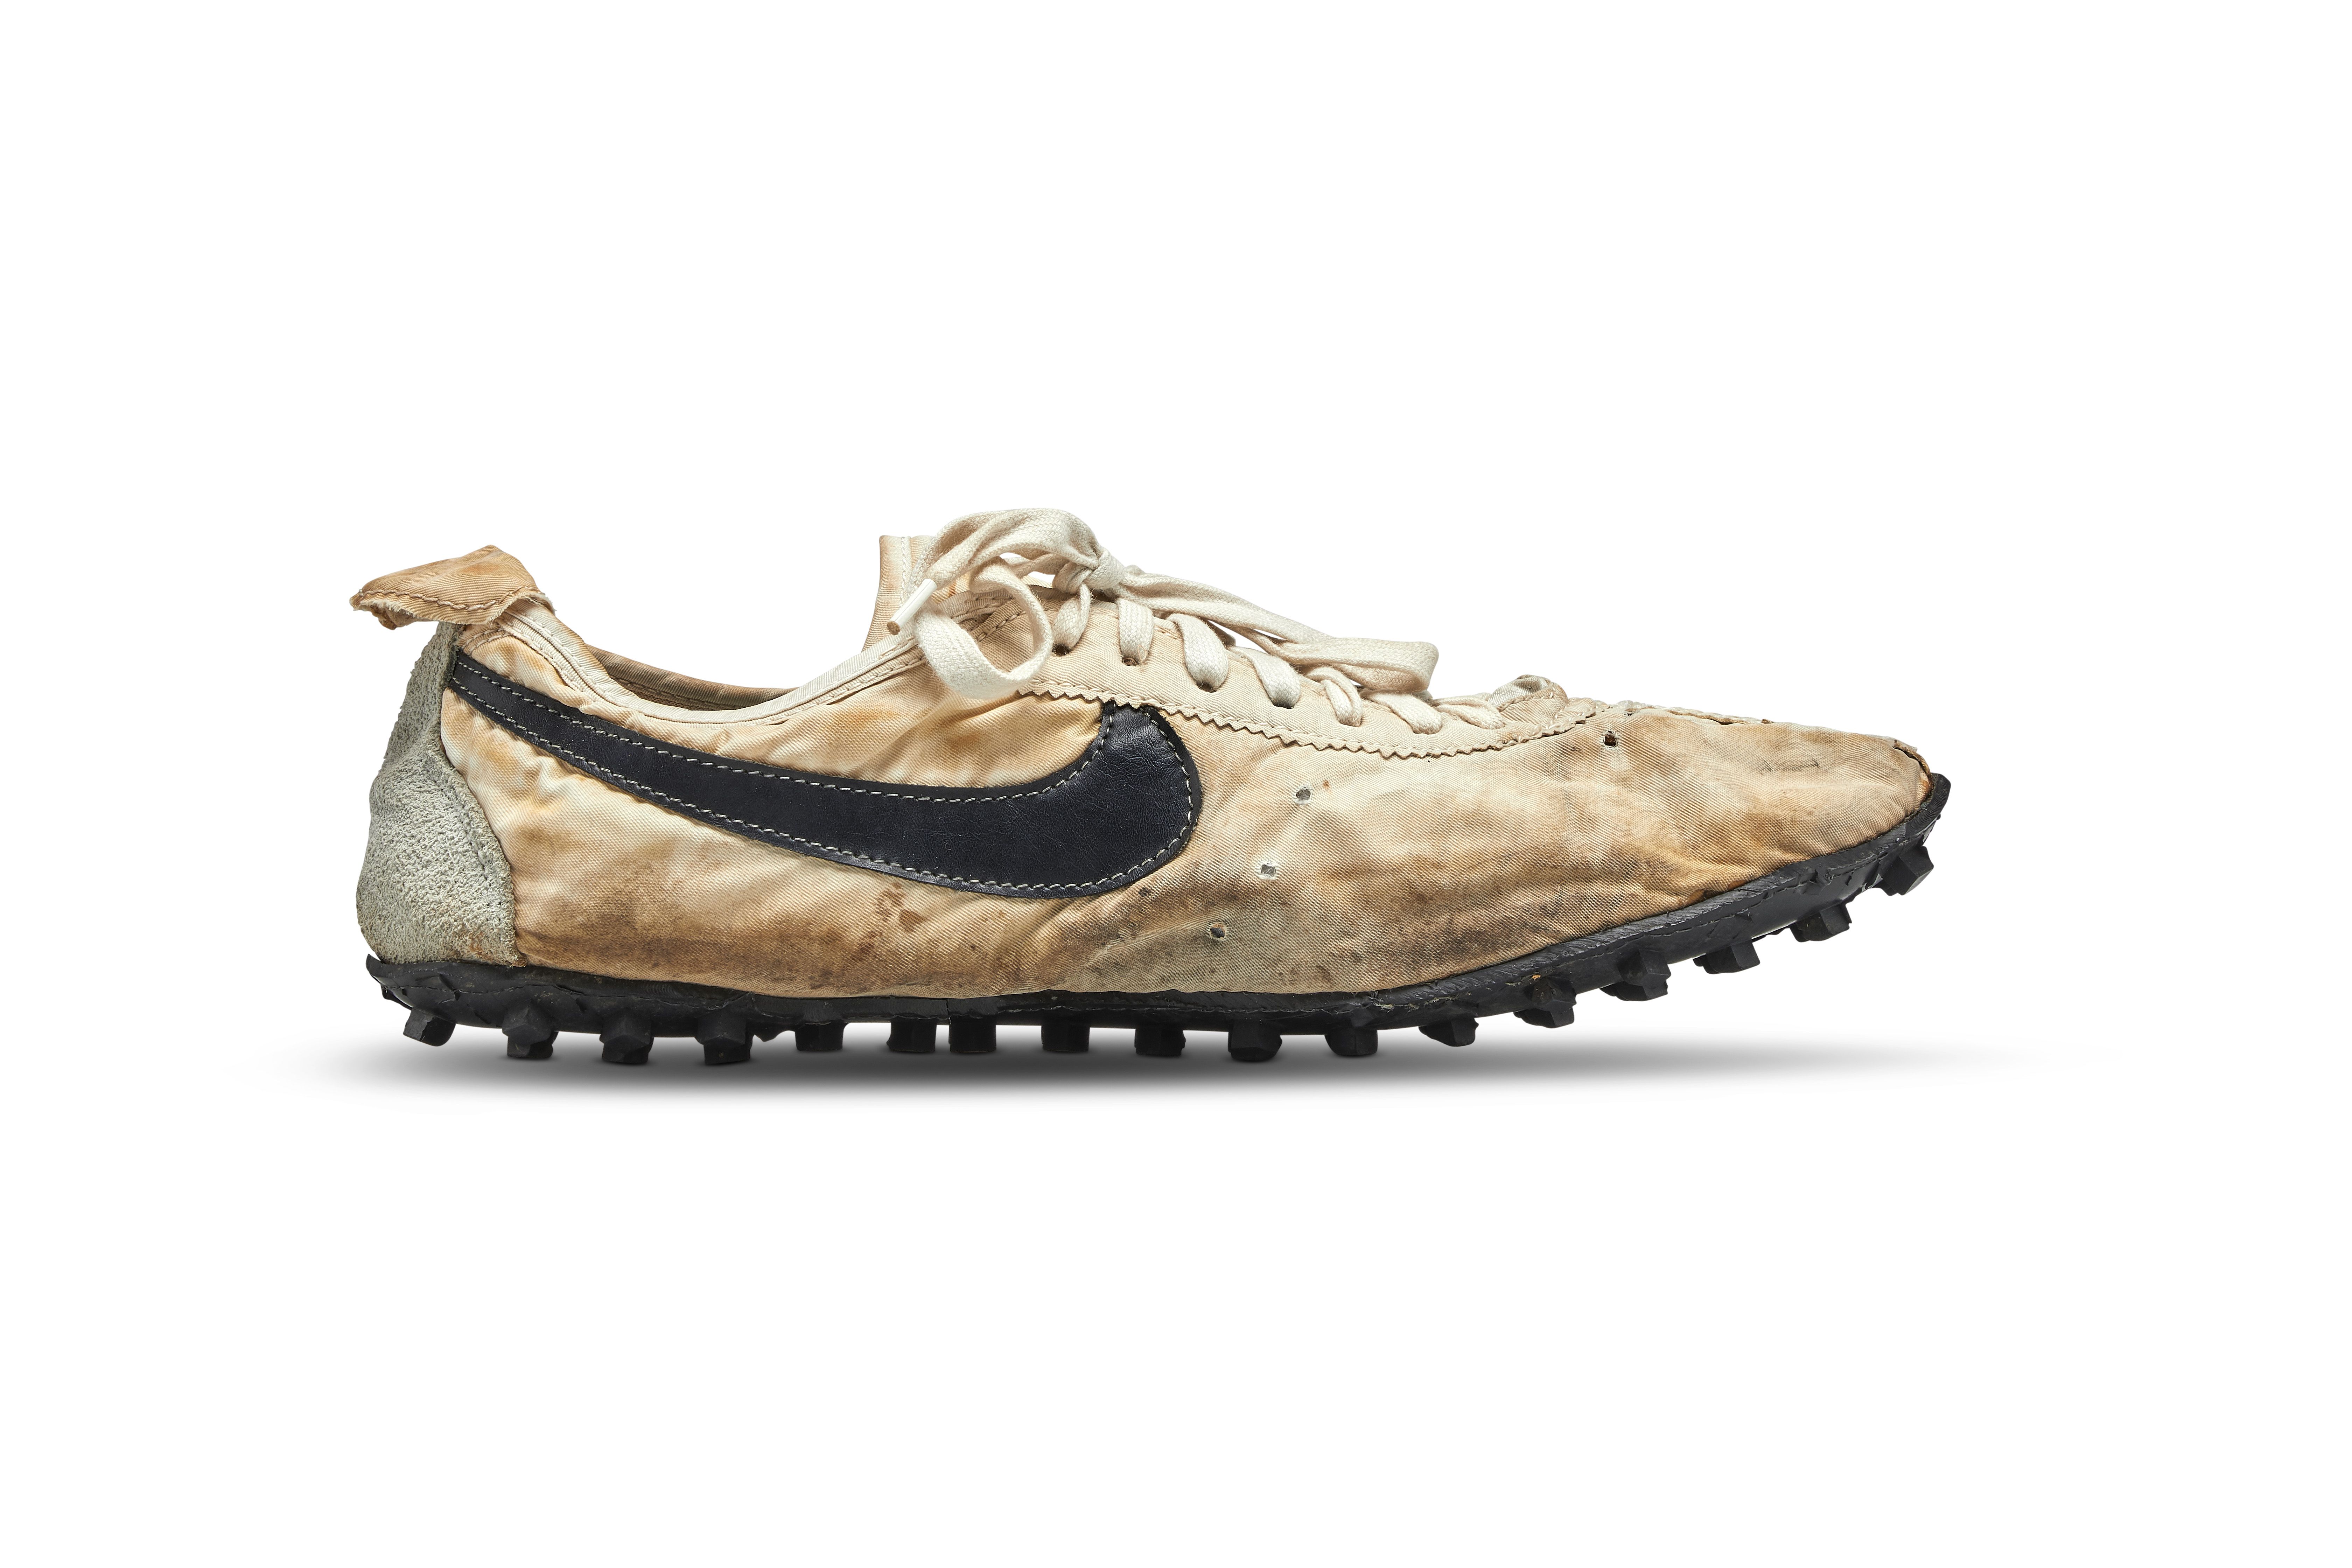 Nike Moon Shoe Auction - Most Expensive 